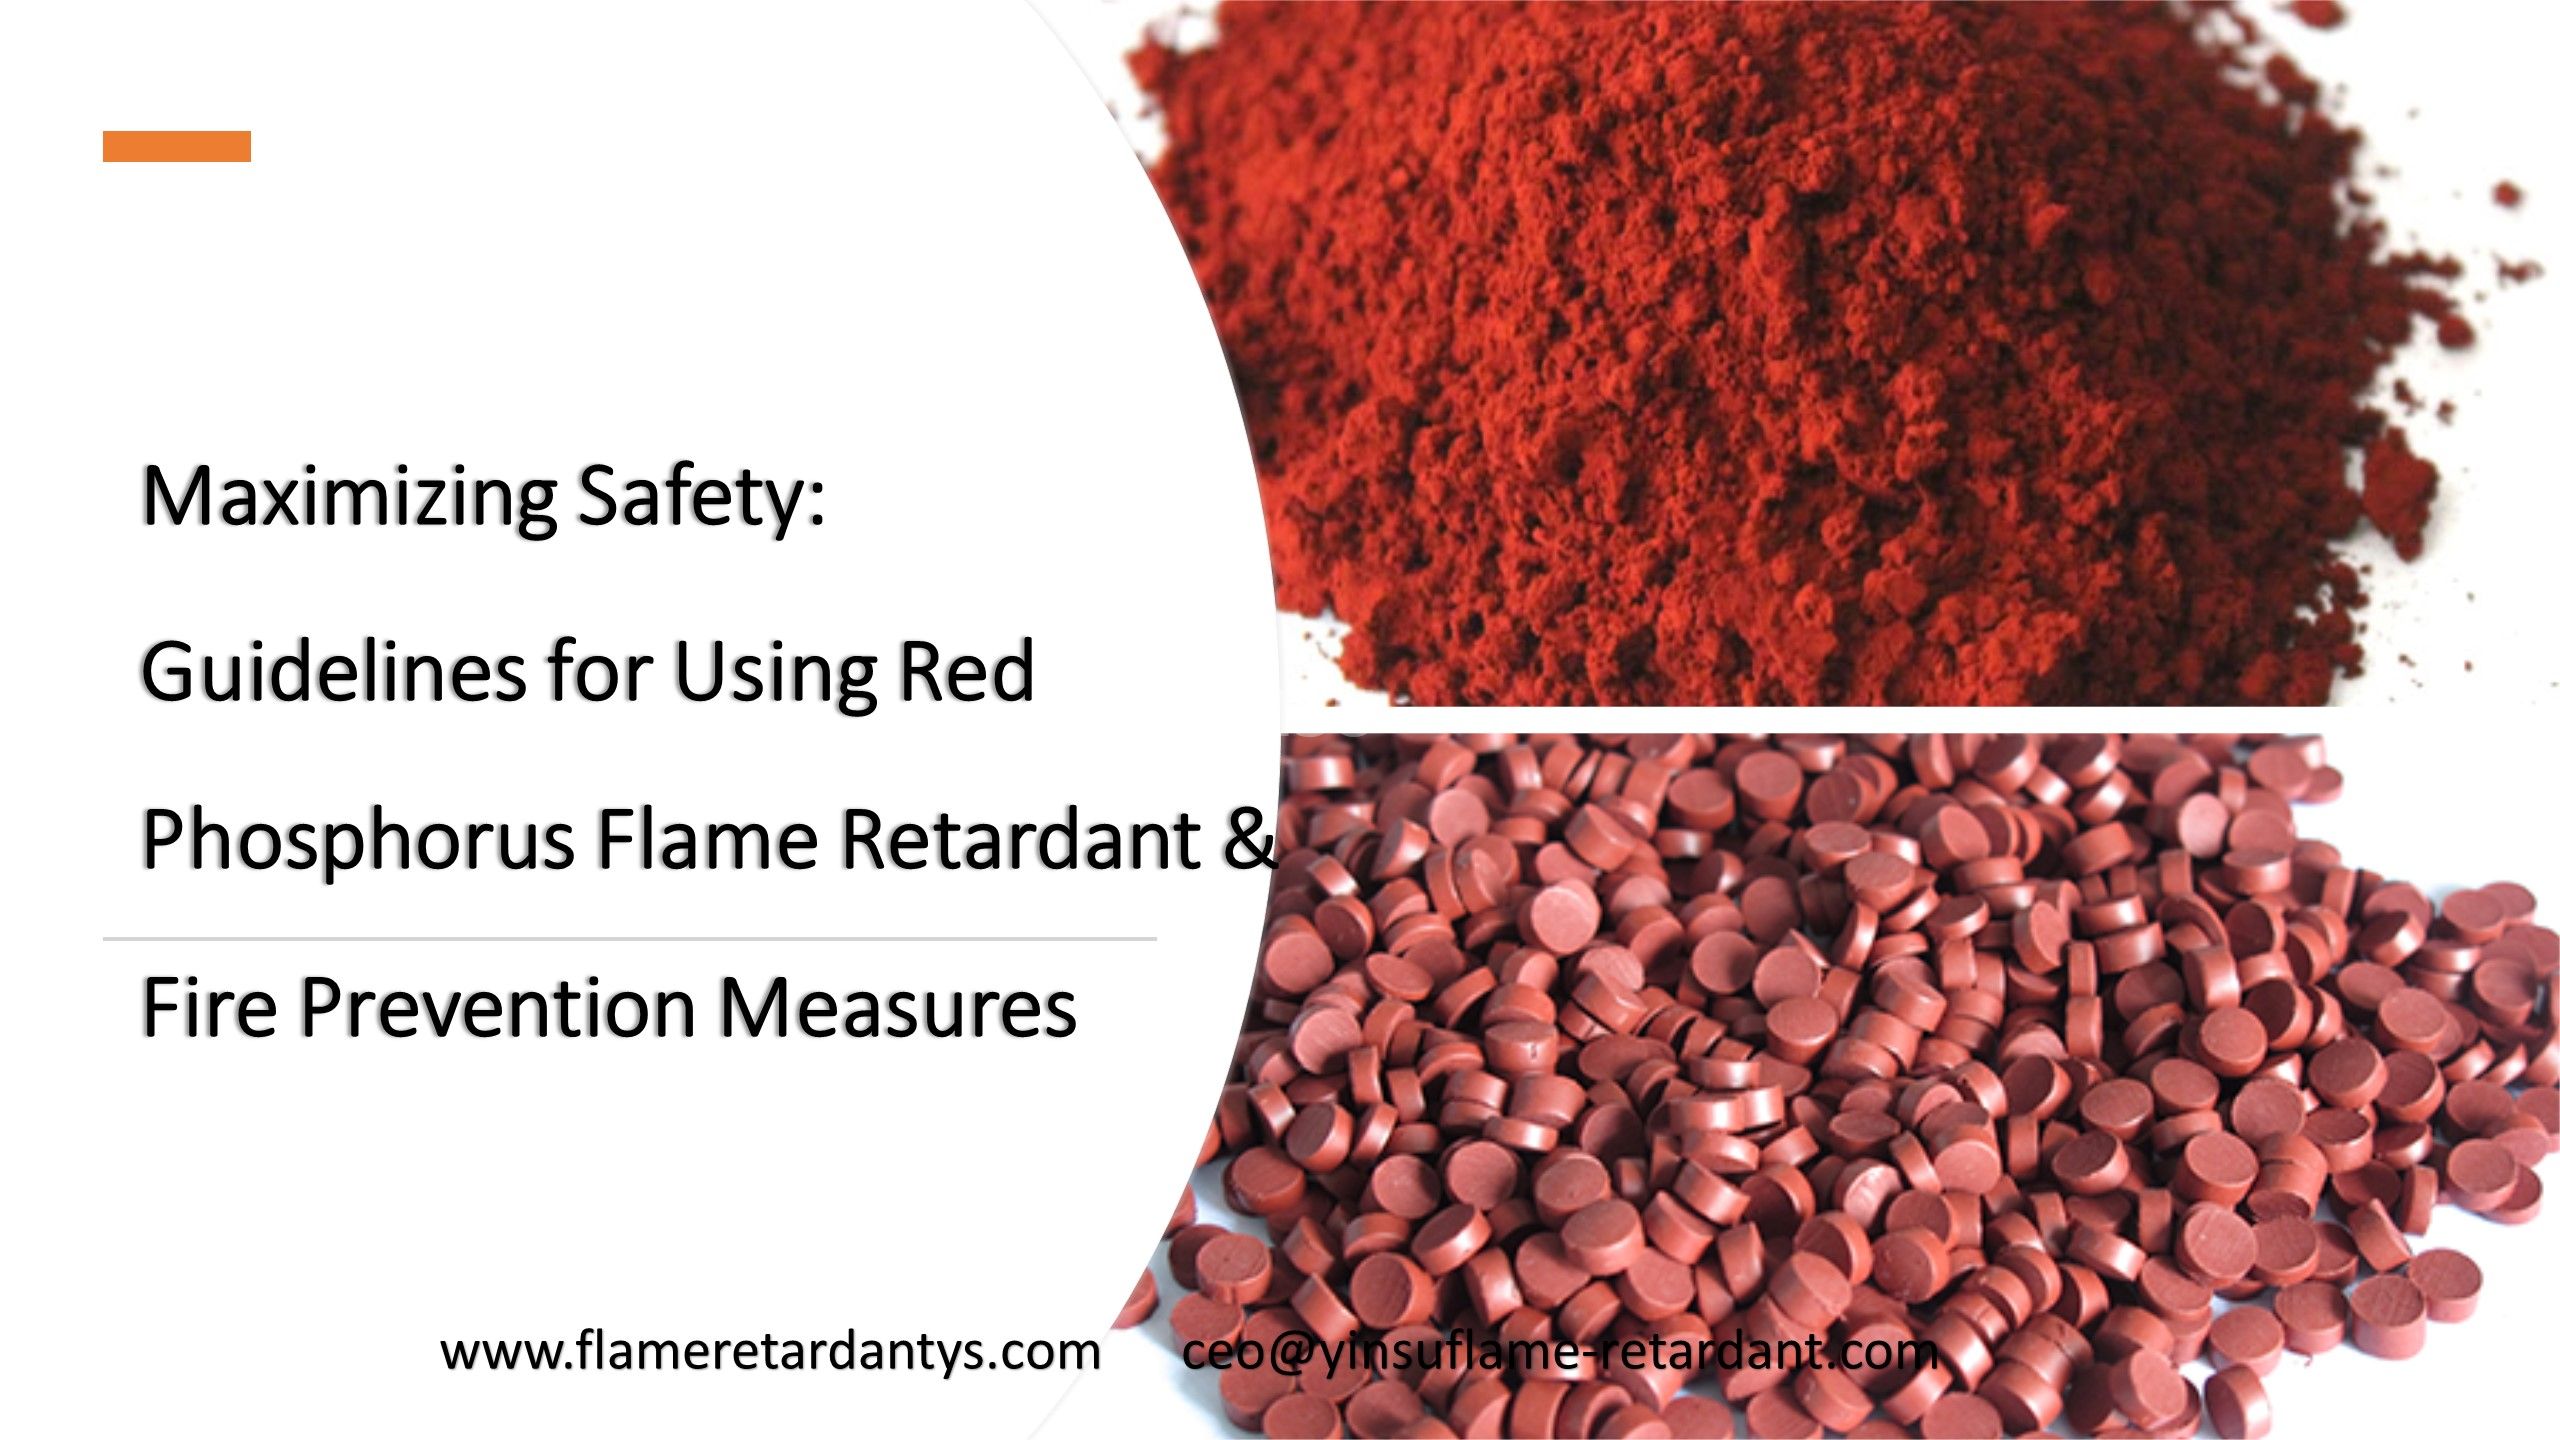 Maximizing Safety: Guidelines for Using Red Phosphorus Flame Retardant & Fire Prevention Measures